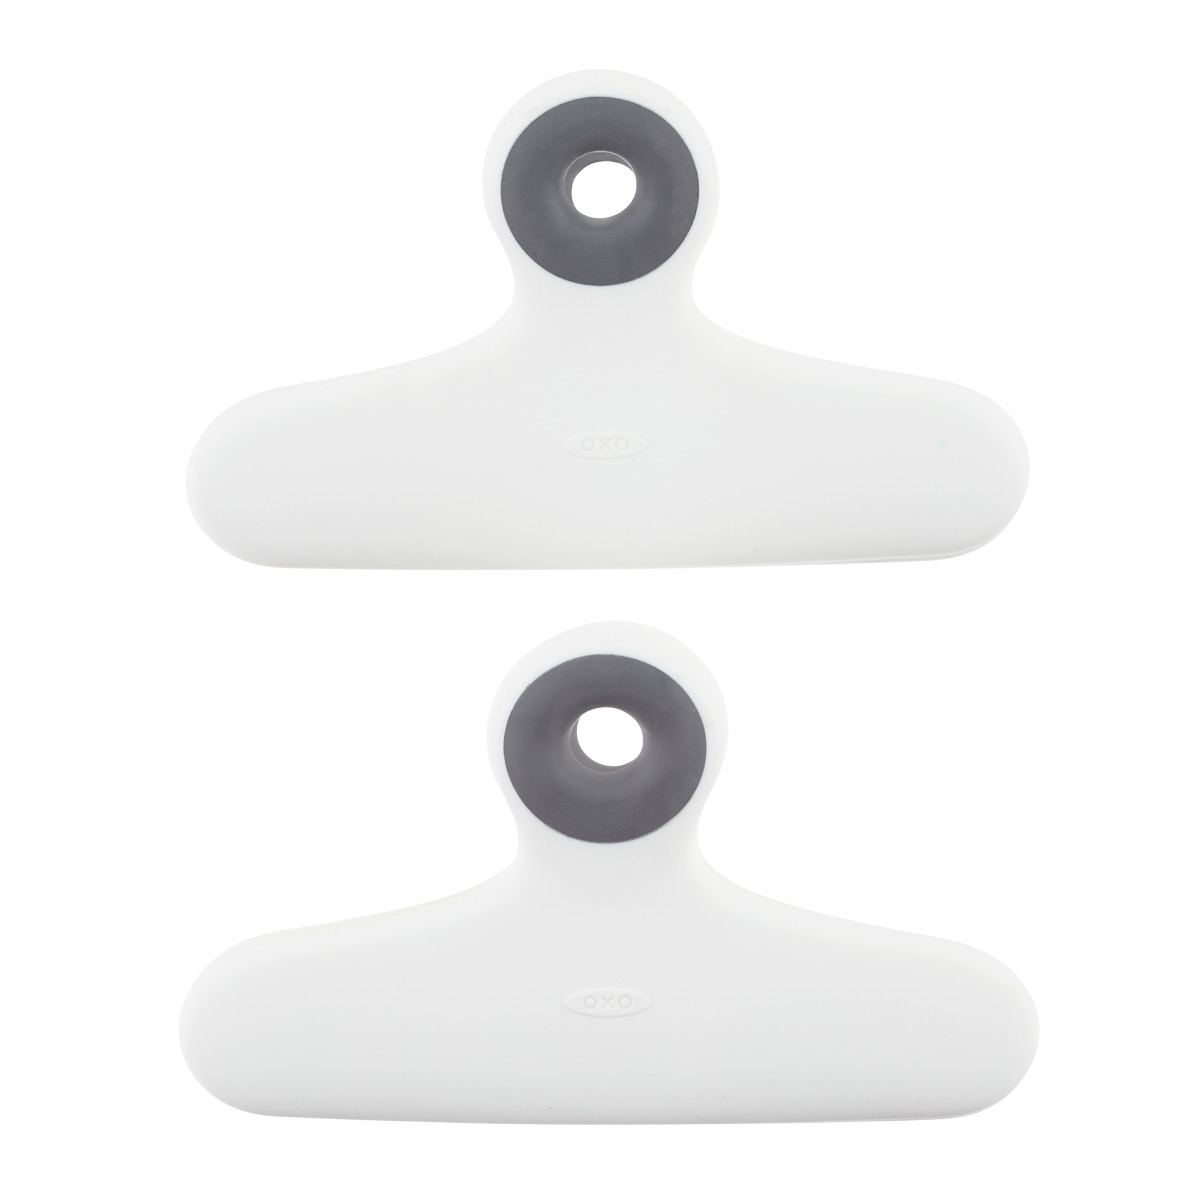 https://www.containerstore.com/catalogimages/310147/10028555-good-grips-gag-clips-white.jpg